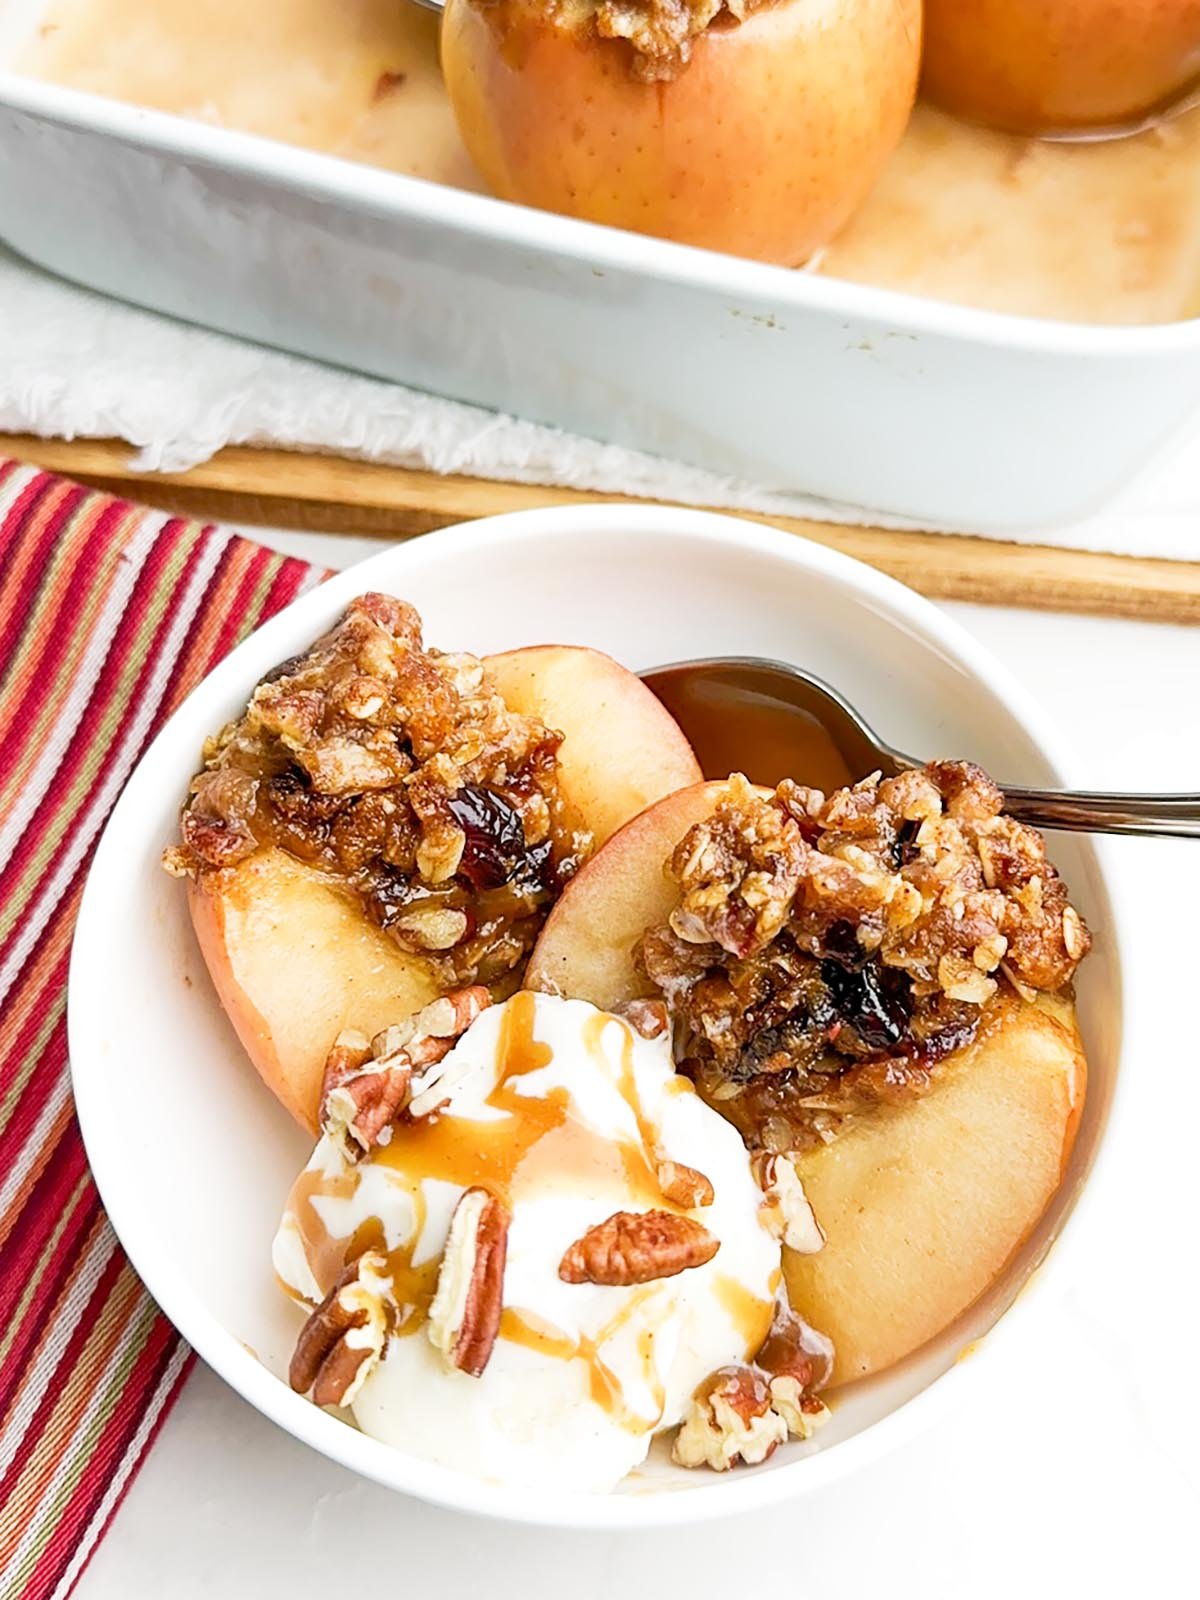 baked cinnamon apple topped with ice cream and caramel sauce